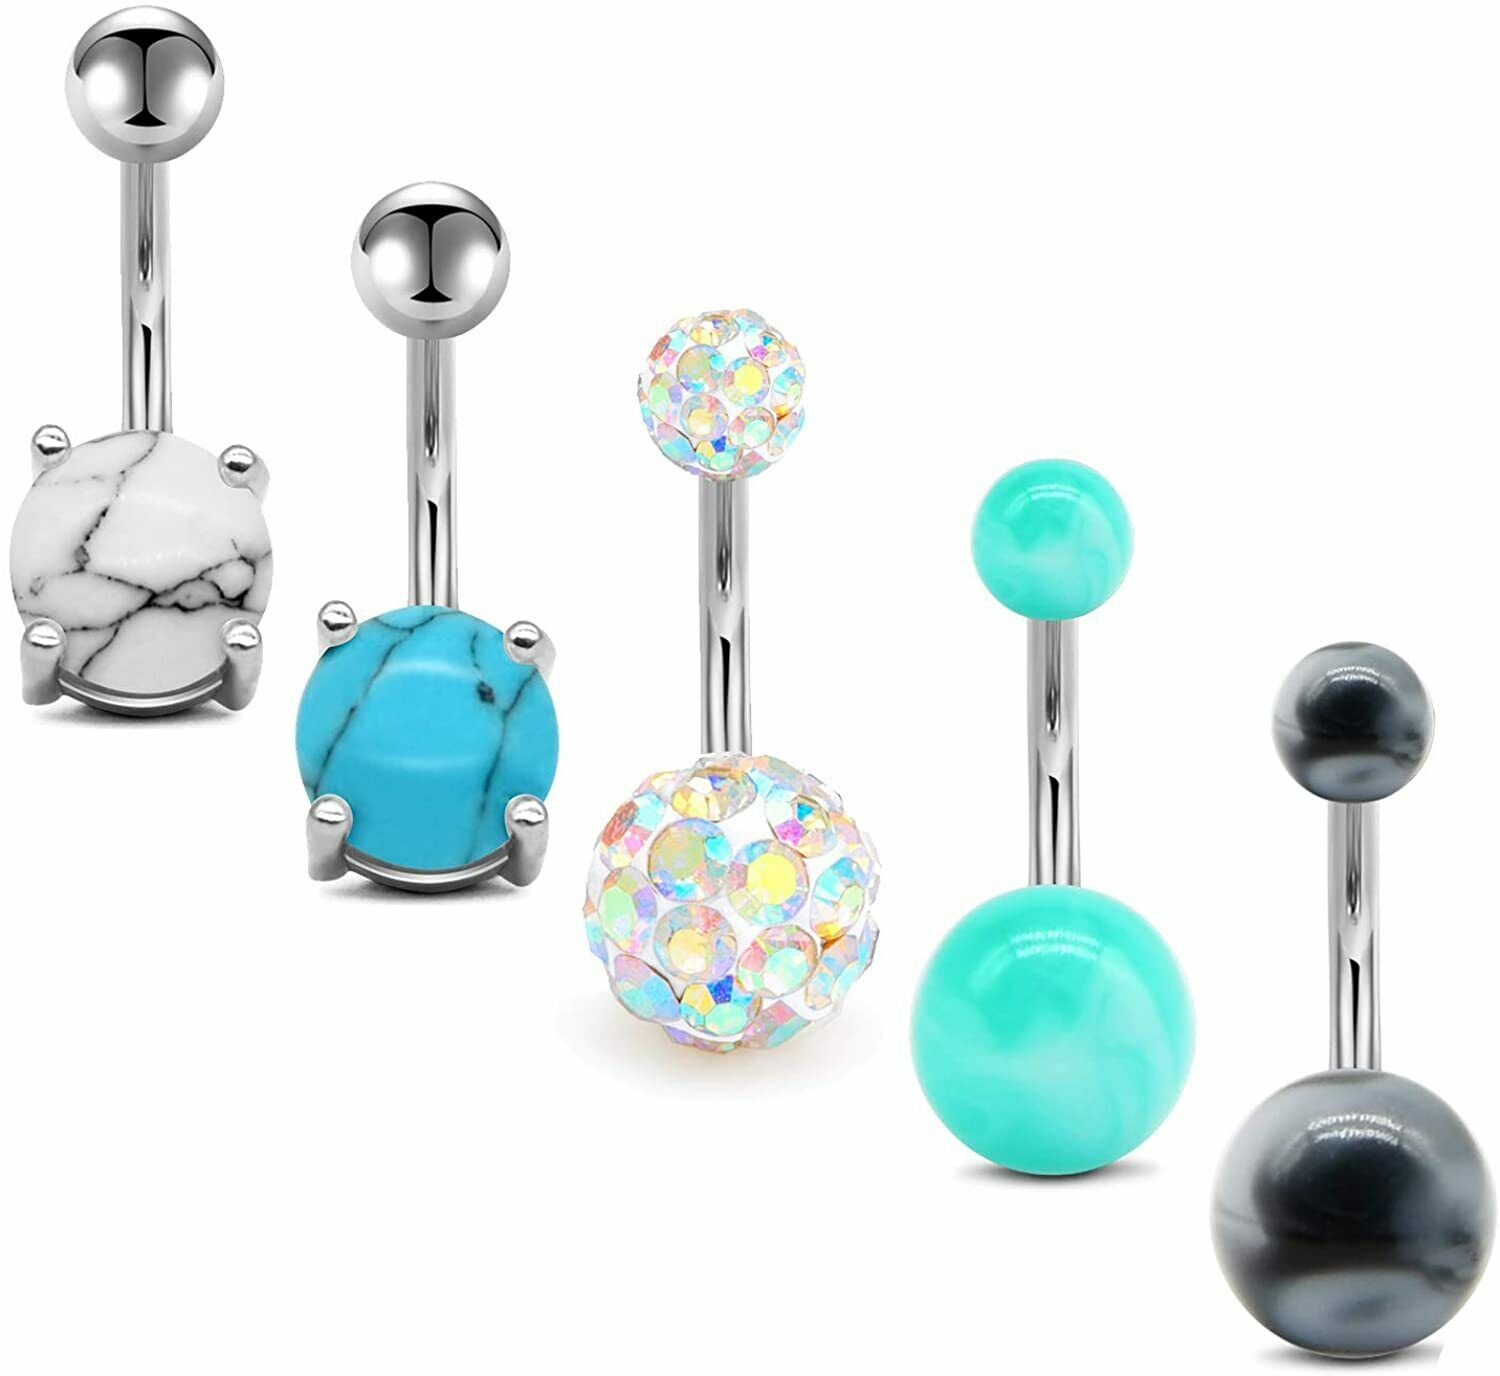 Belly Button Rings Stainless Steel 14g Pearl Belly Ring Navel Piercings Jewelry